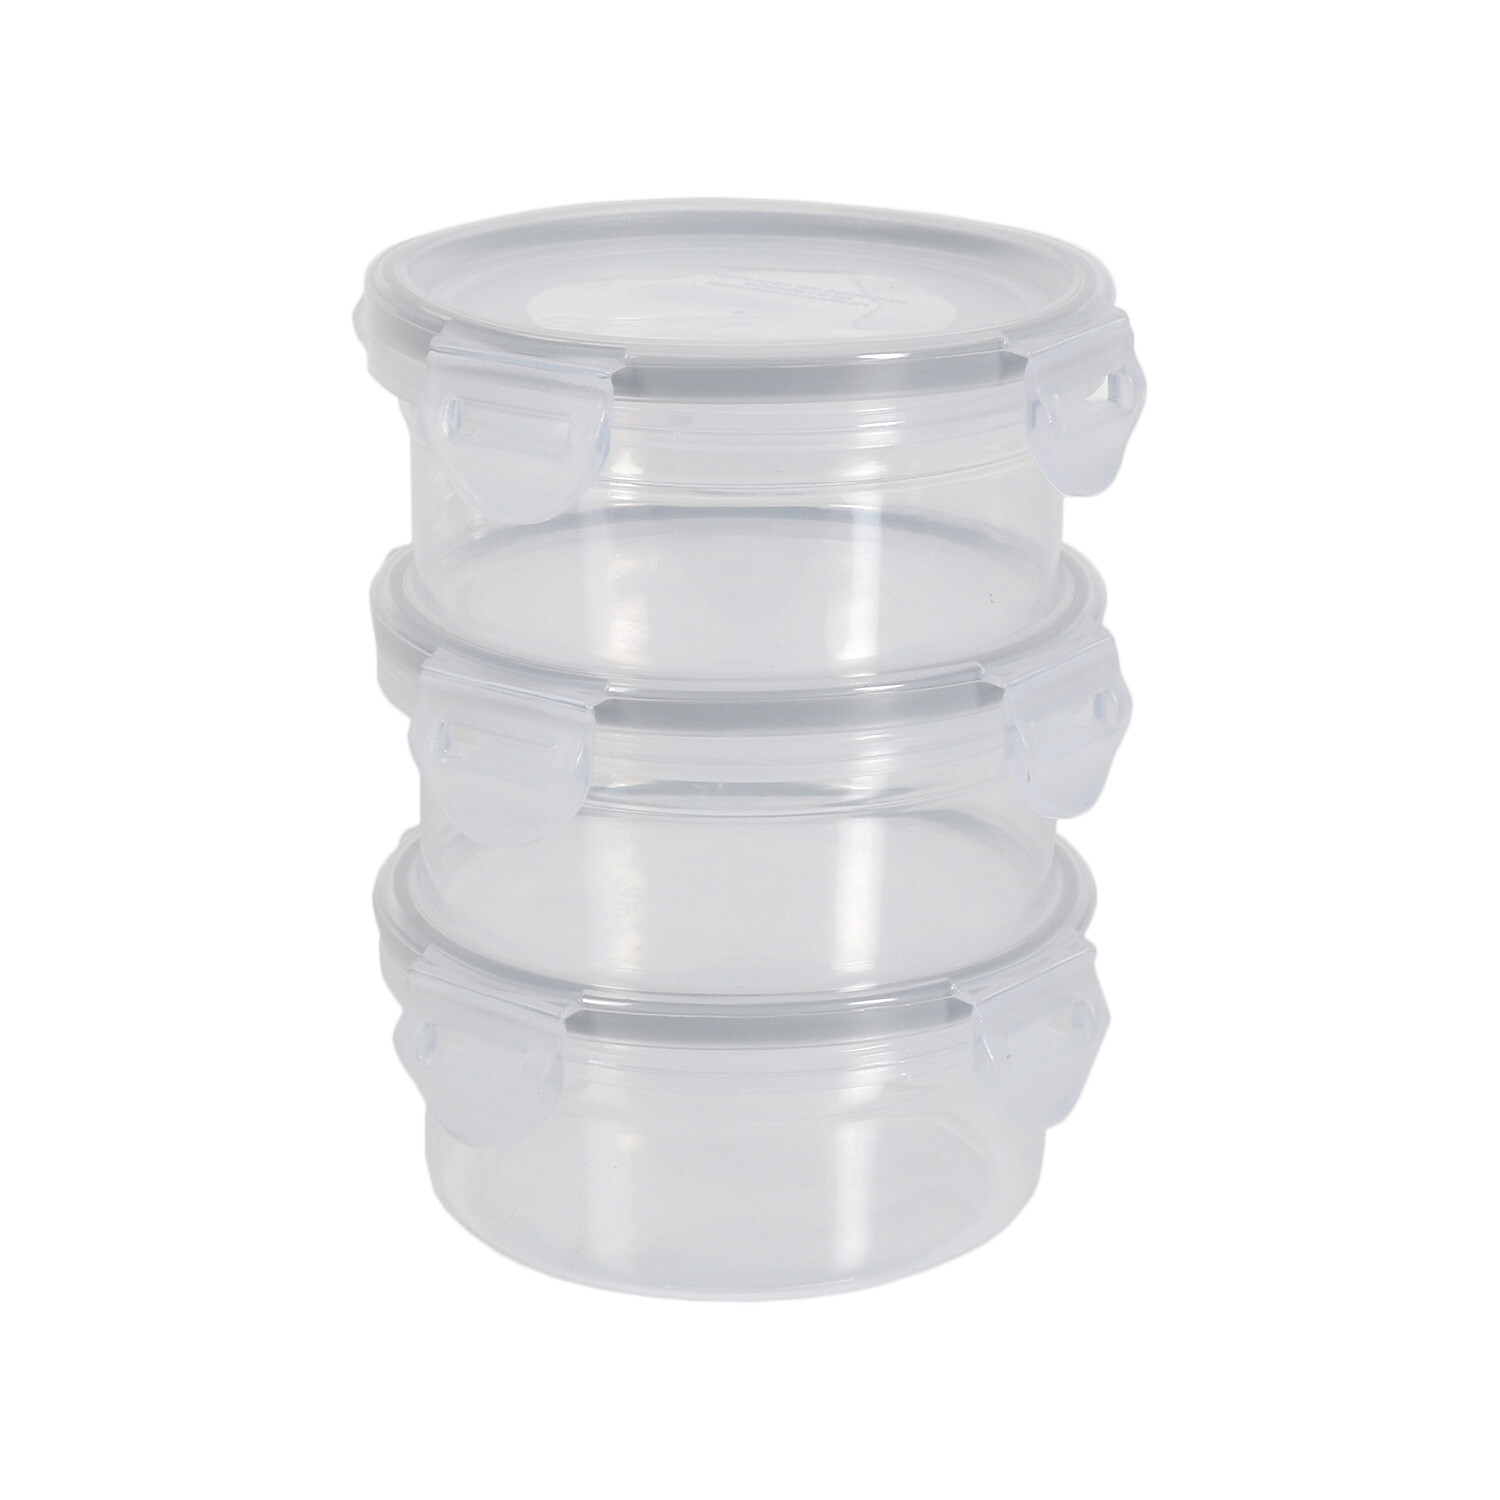 200ml Round Clip and Lock Food Containers 3 Pack Image